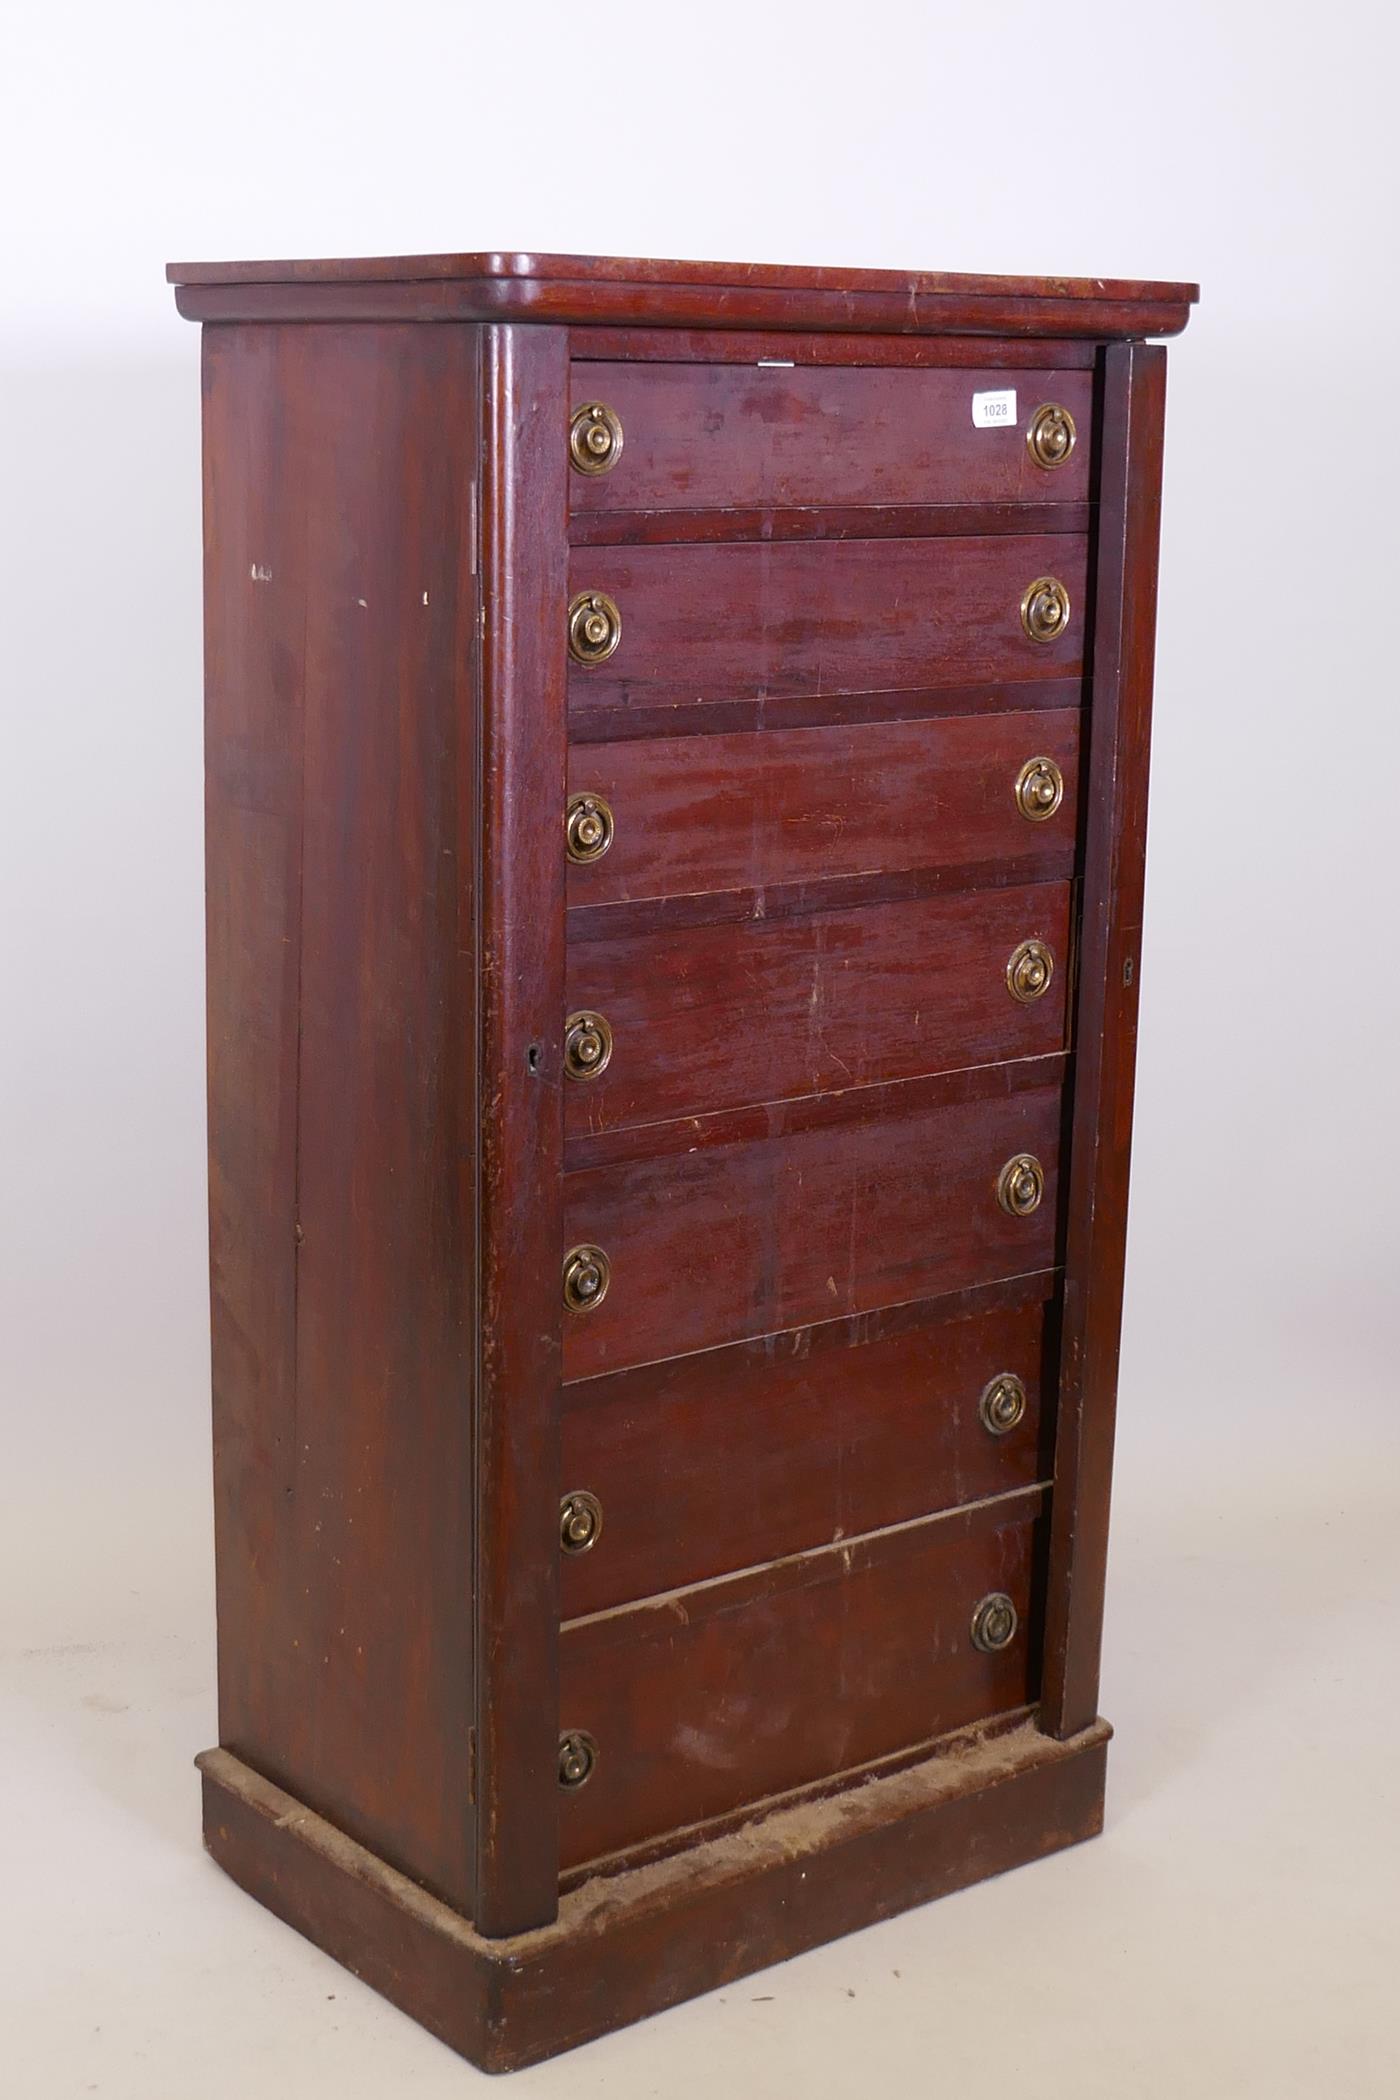 A C19th mahogany seven drawer Wellington chest, with brass ring handles, raised on a plinth base,